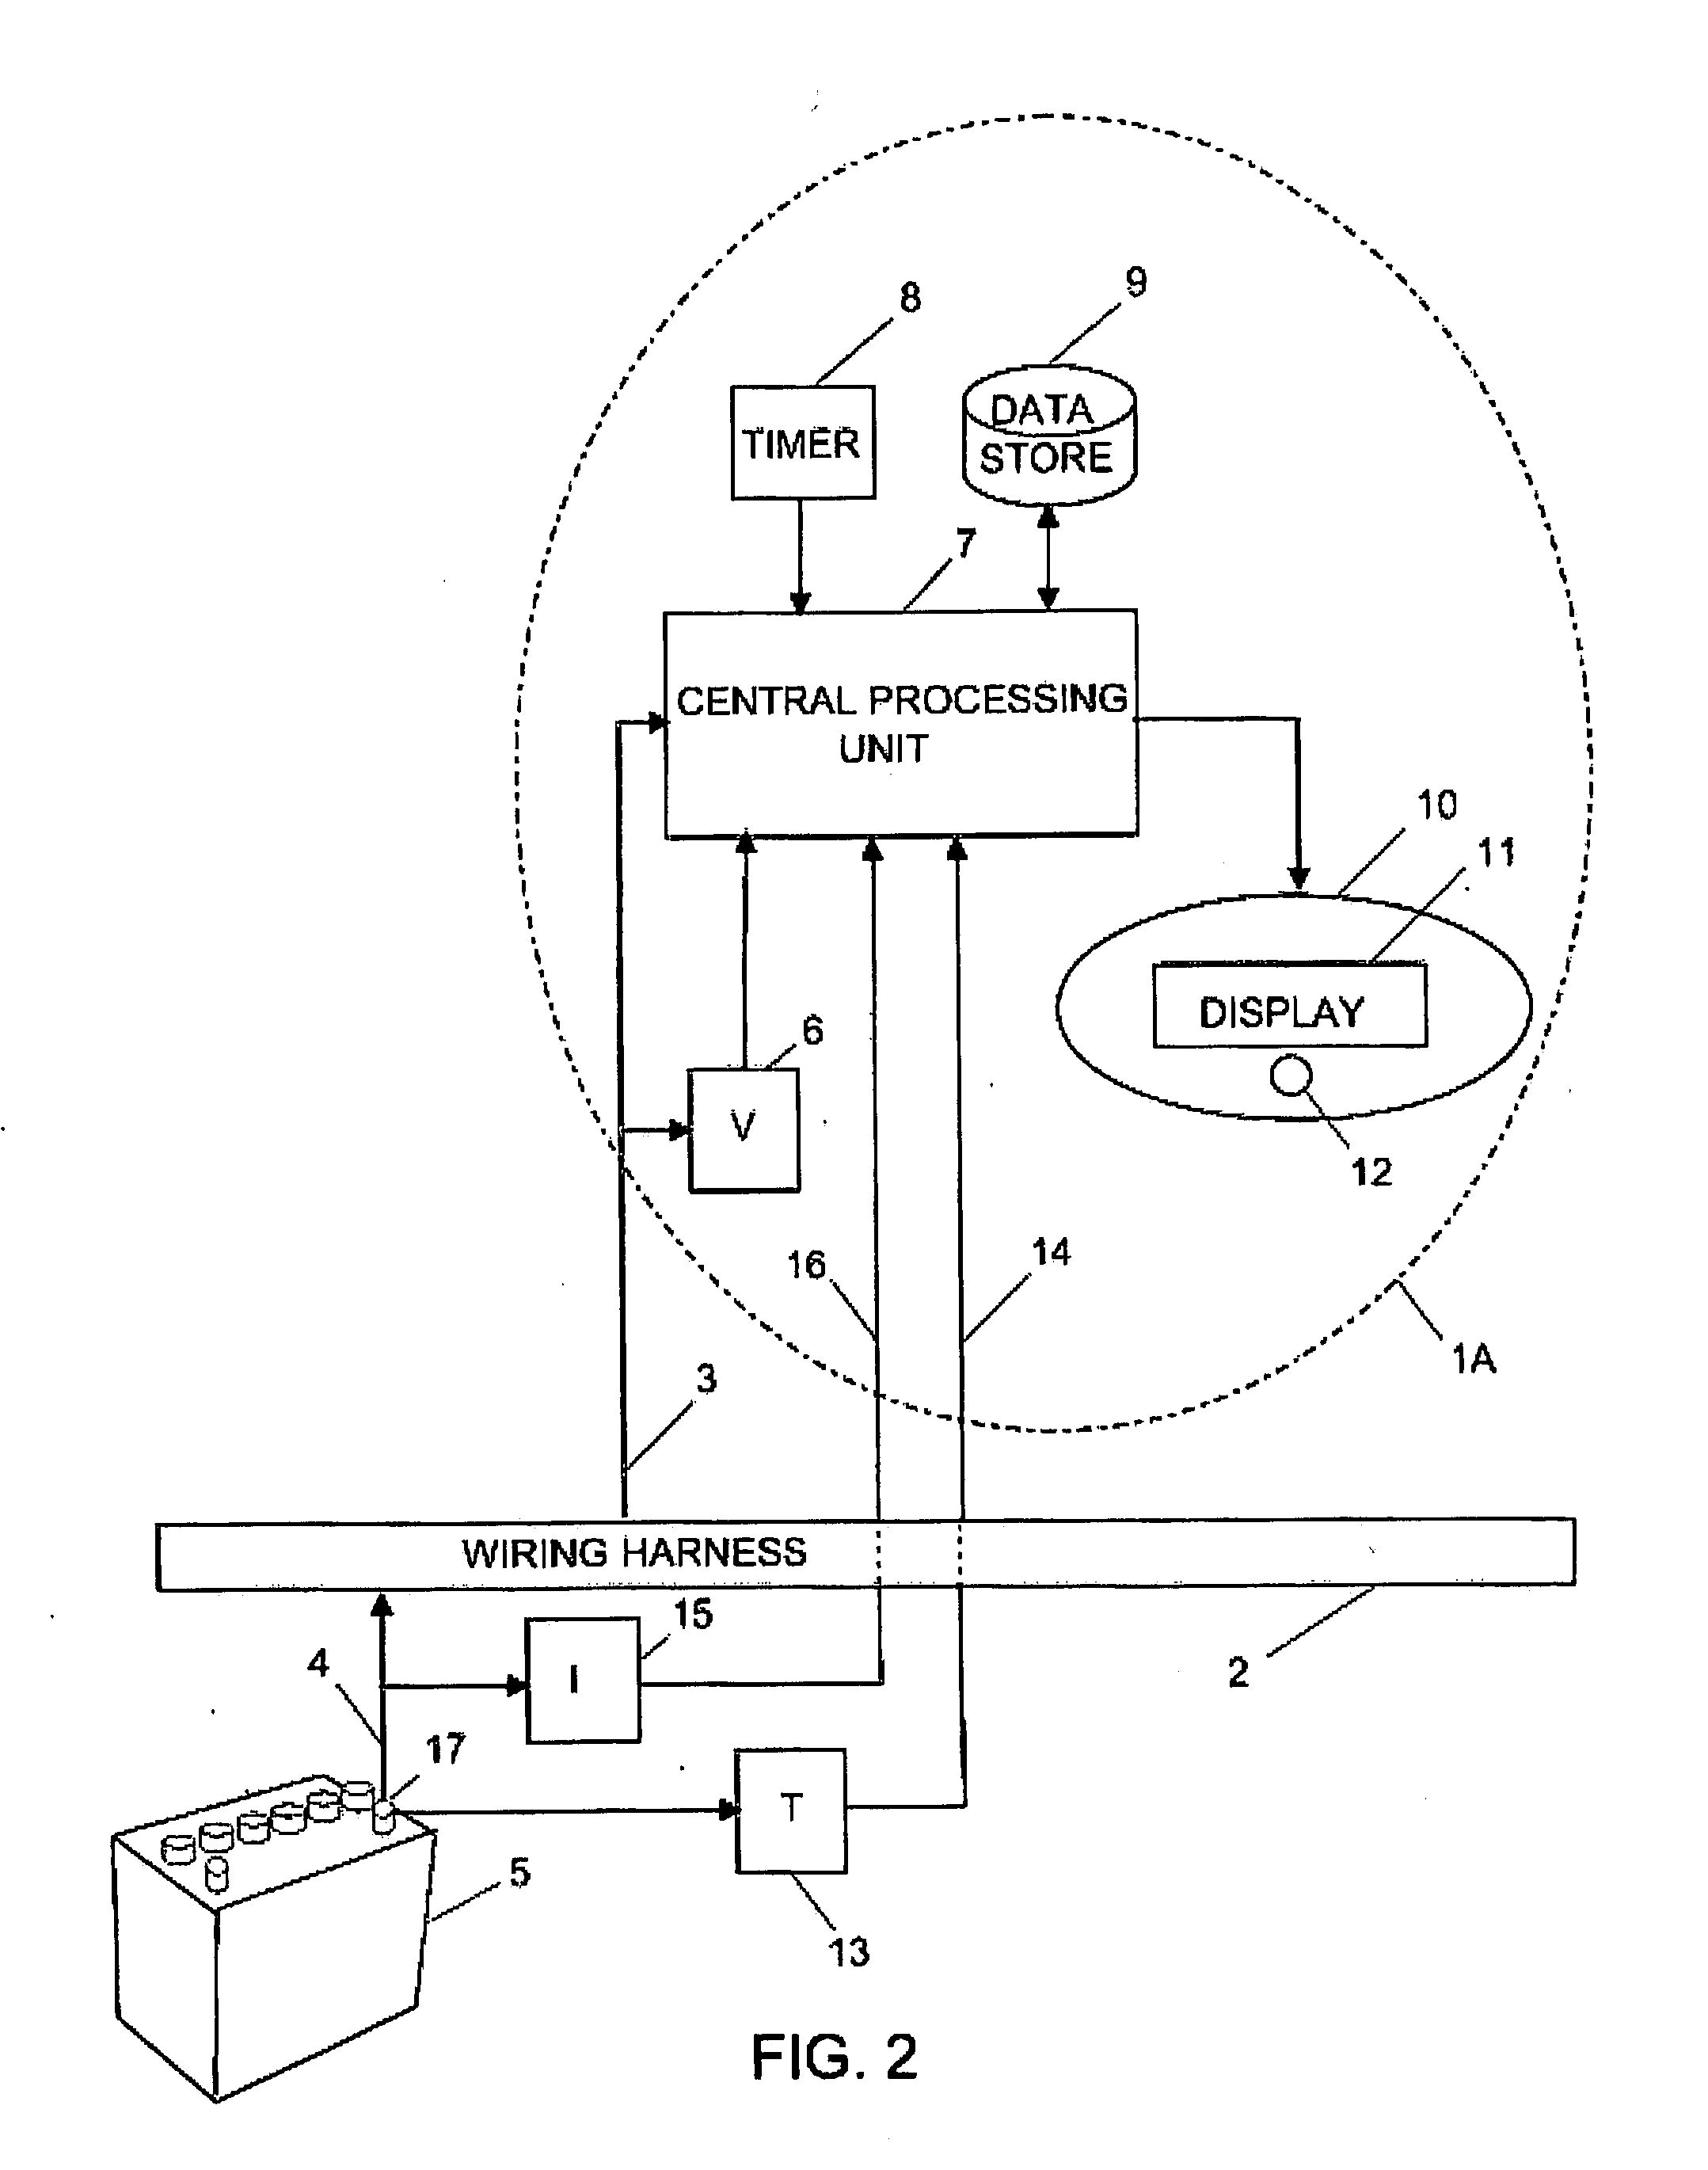 Battery monitor system attached to a vehicle wiring harness